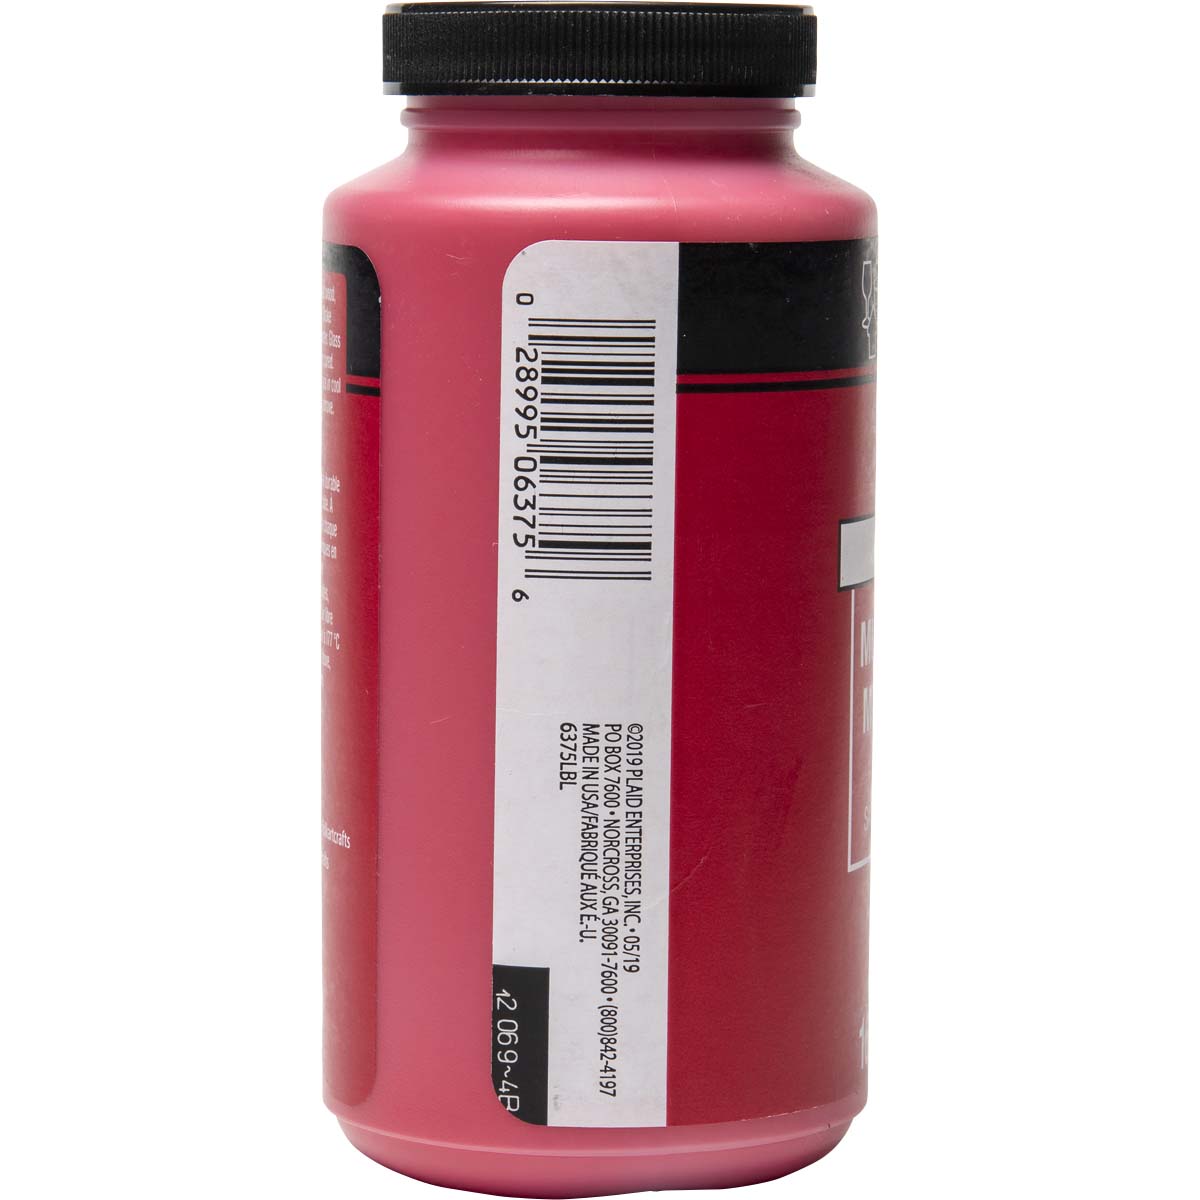 6 Pack FolkArt Acrylic Paint 2oz-Apple Red FA-2548 - GettyCrafts